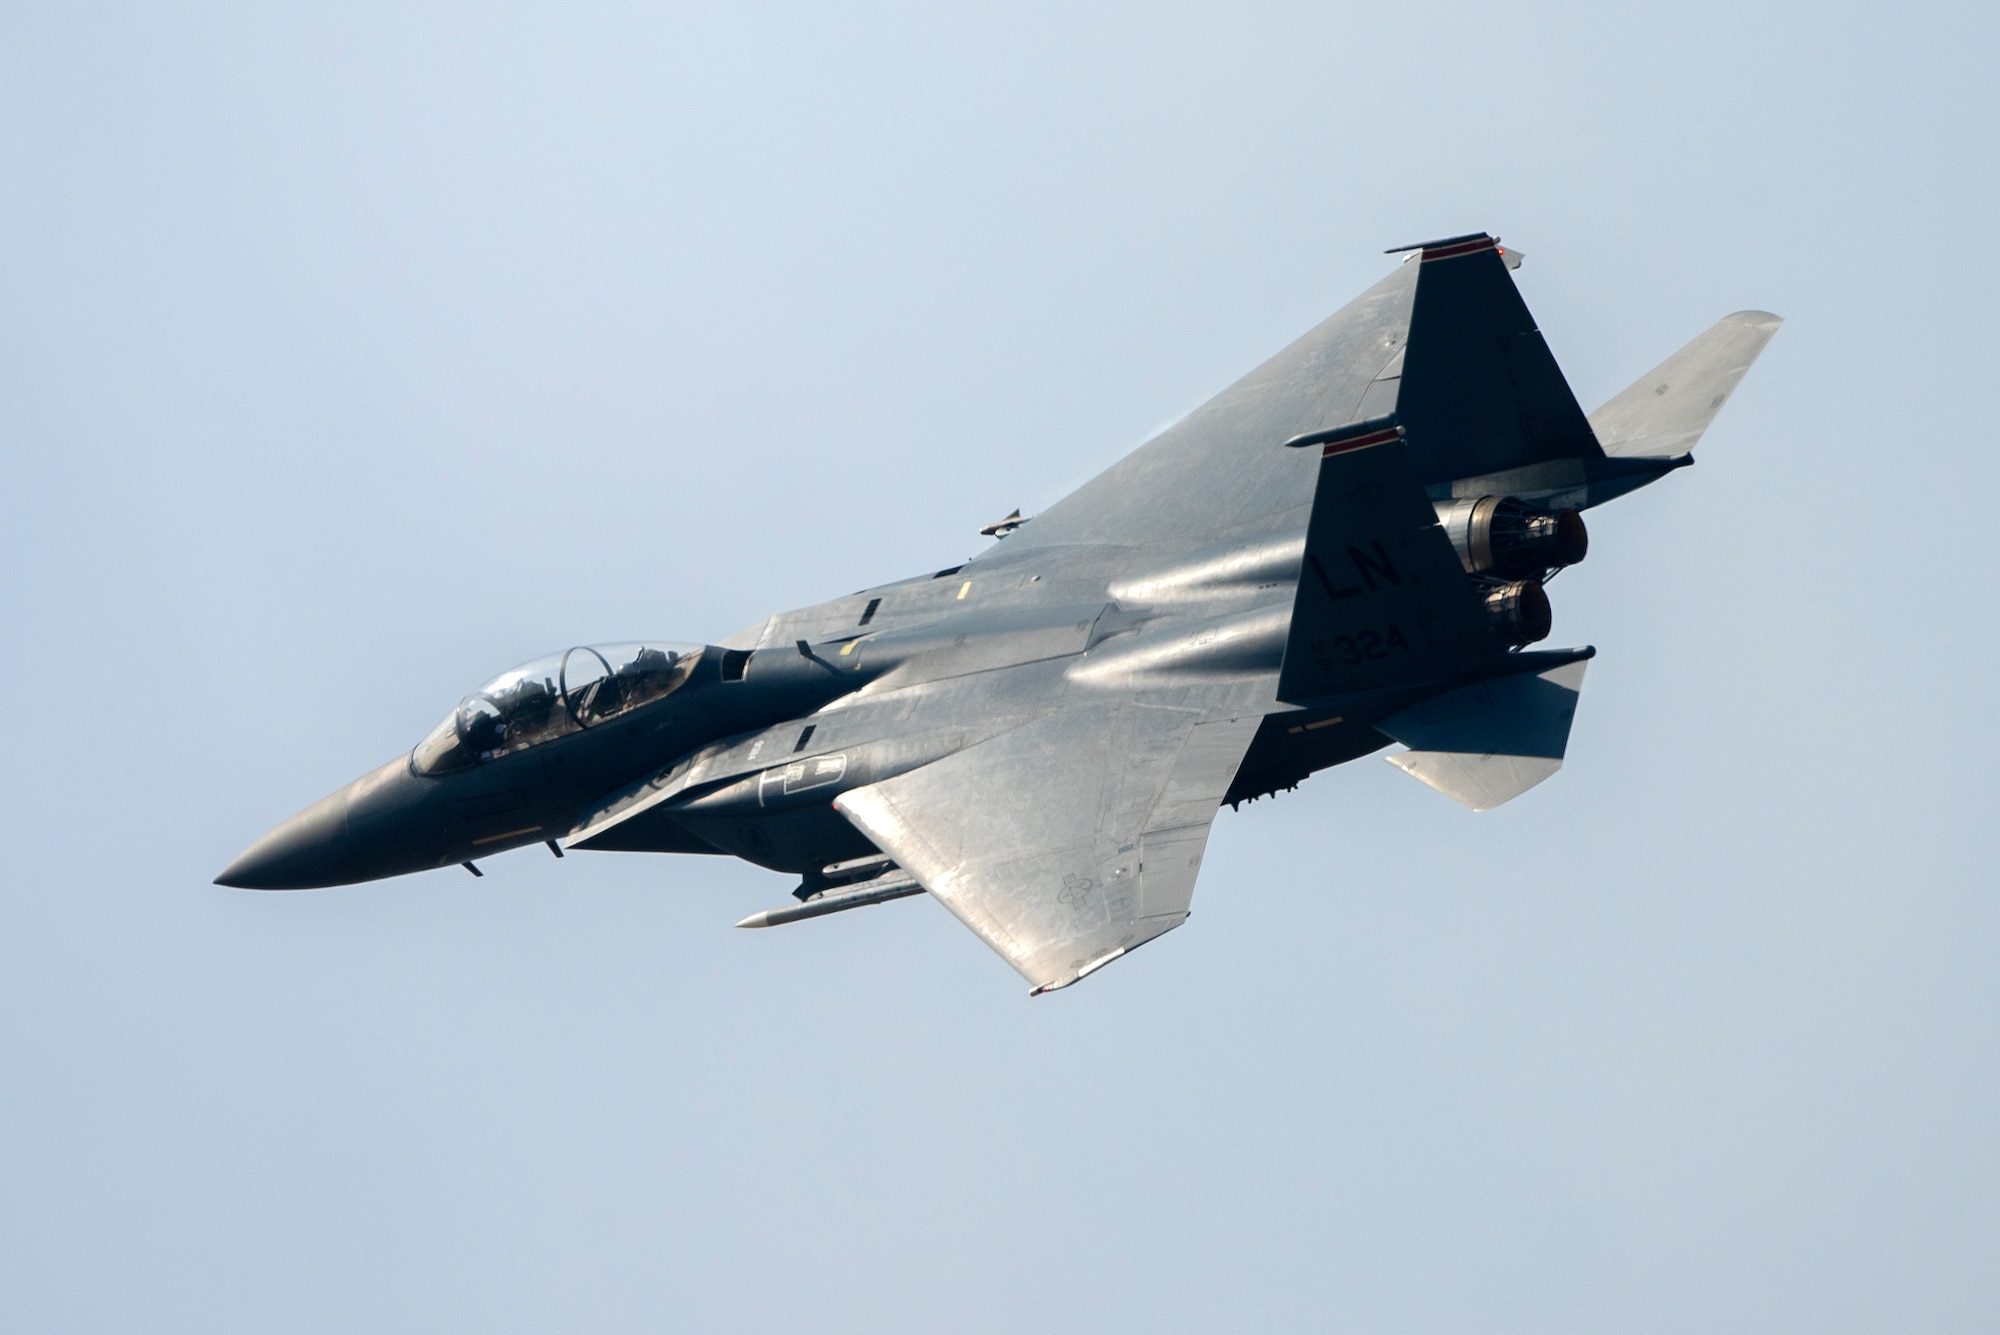 An F-15E Strike Eagle assigned to the 494th Fighter Squadron flies over Royal Air Force Lakenheath, England, May 20, 2020. The Liberty Wing continues to maintain combat readiness in order to safeguard U.S. national interests and those of our allies and partners. (U.S. Air Force photo by Airman 1st Class Jessi Monte)